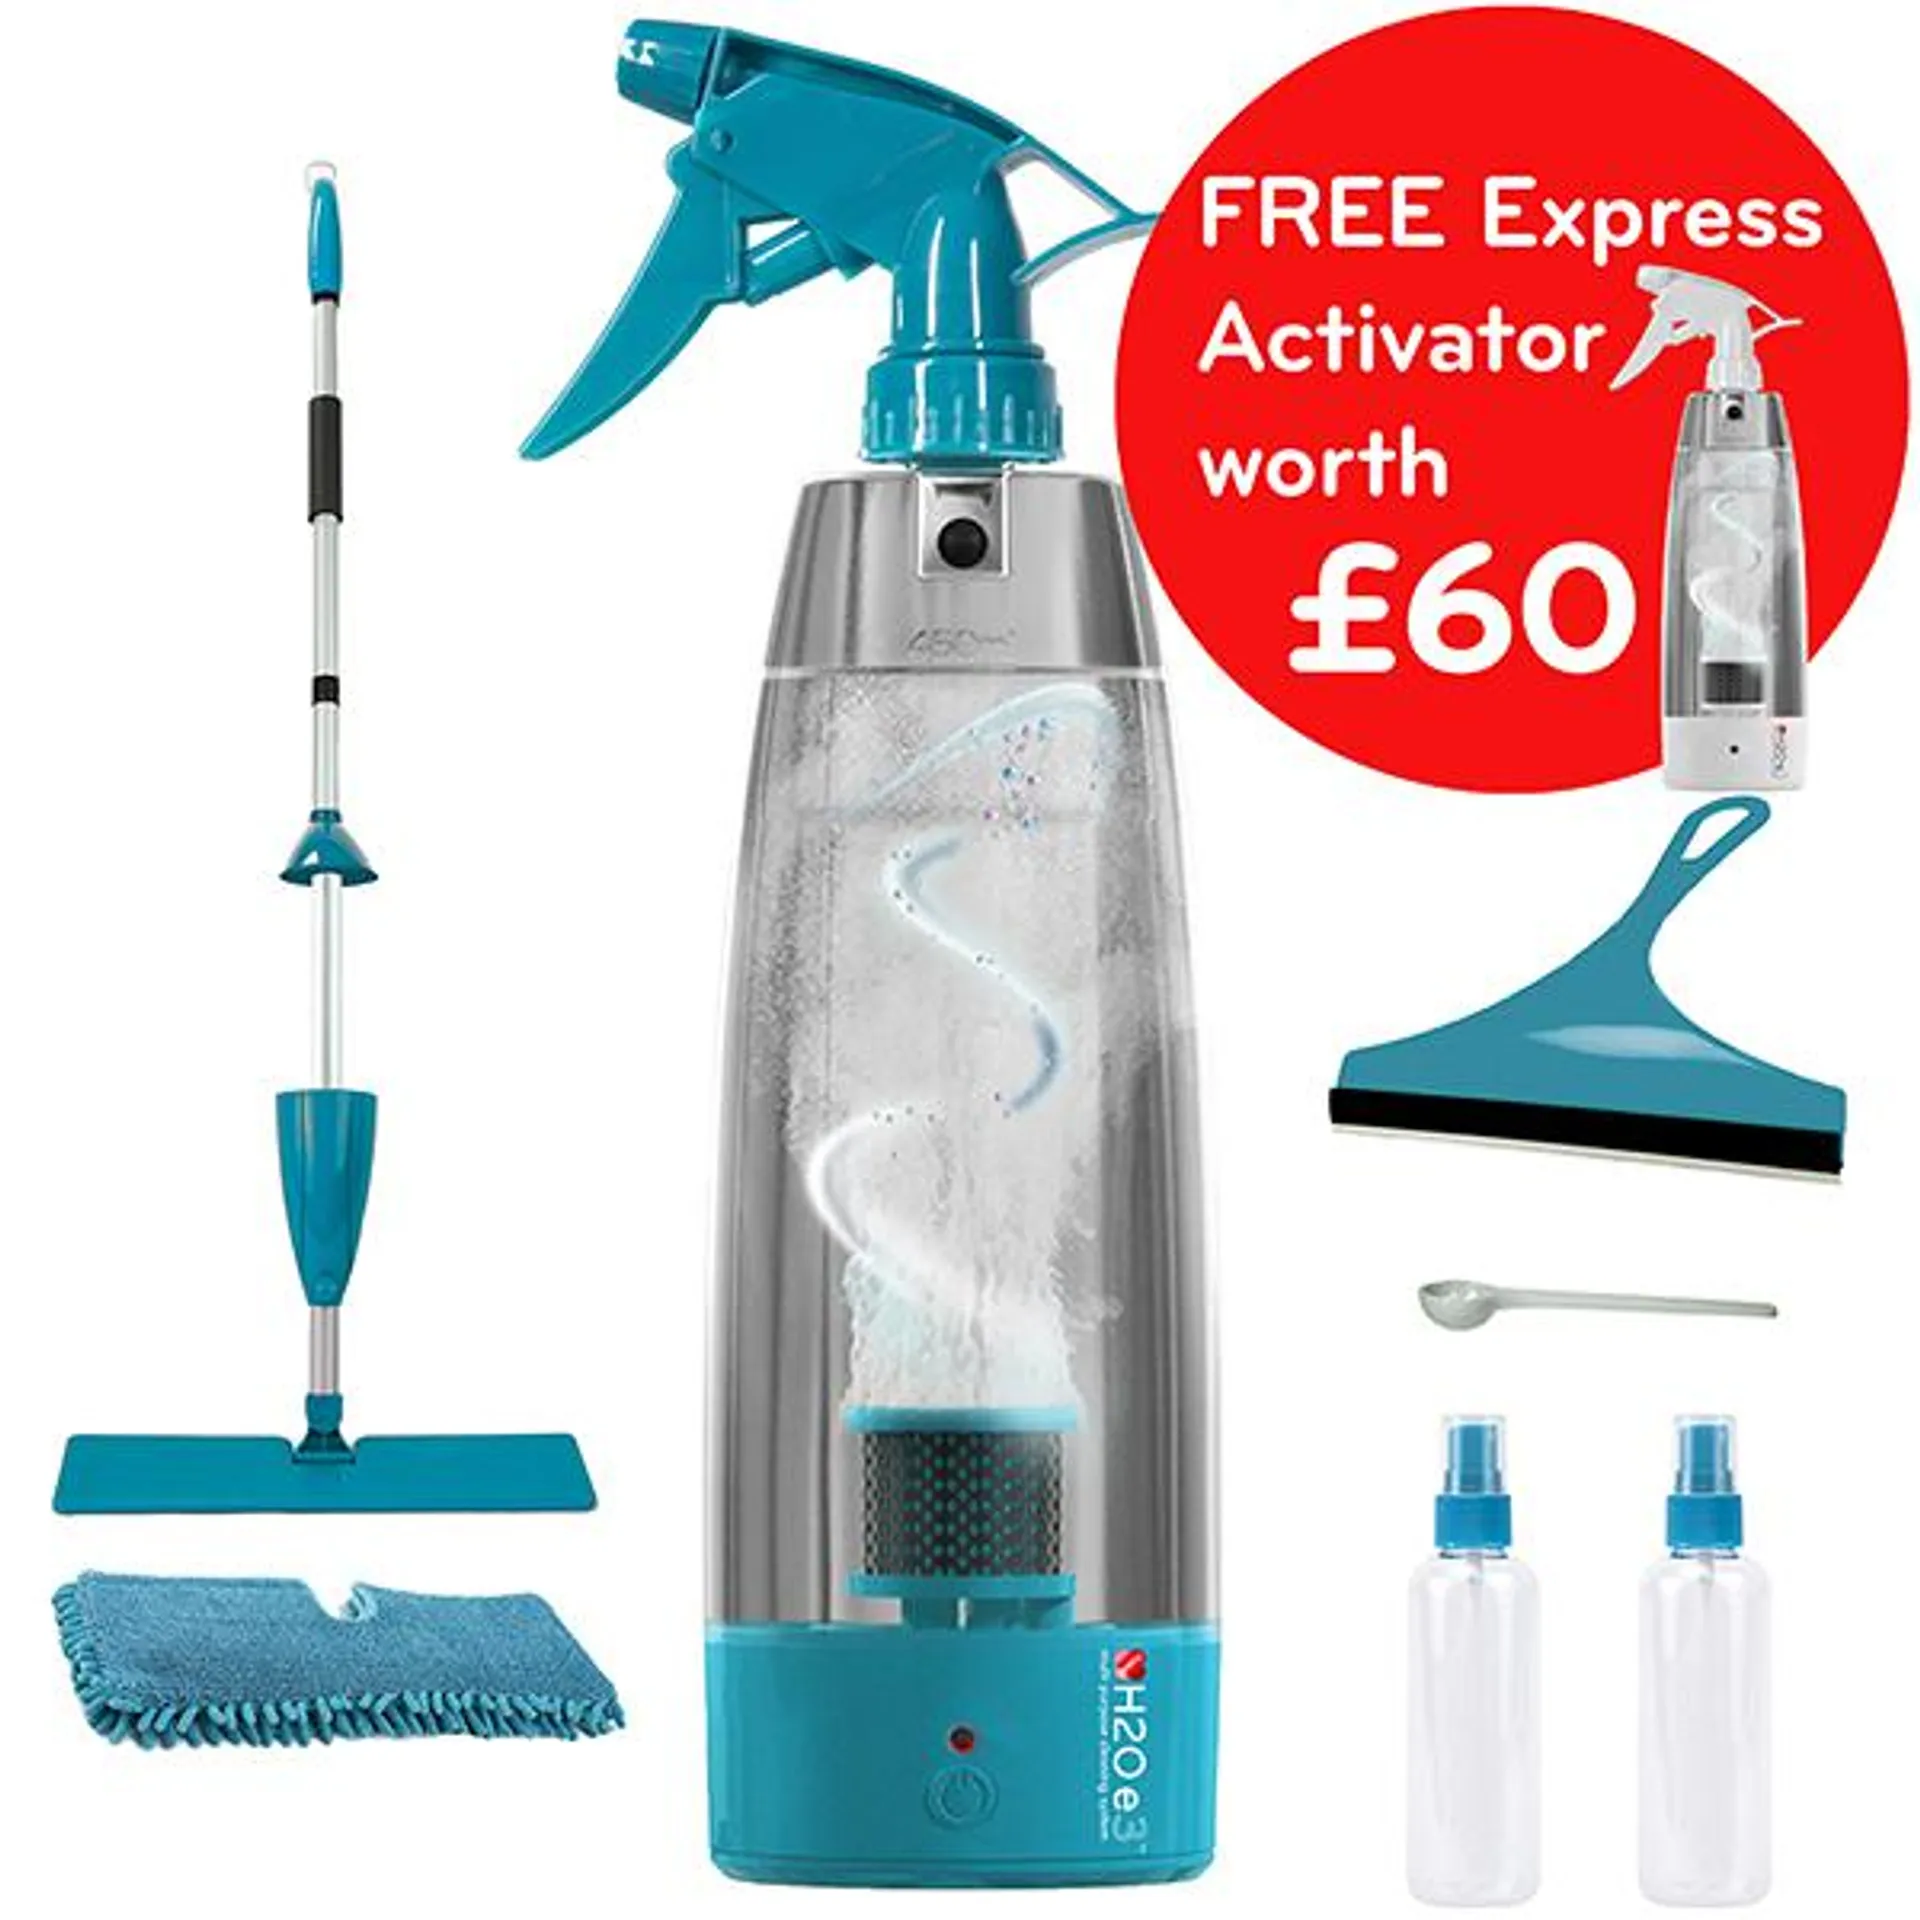 H2O e3 Multi-Purpose Total Home Cleaning System includes Mop plus FREE Express Activator